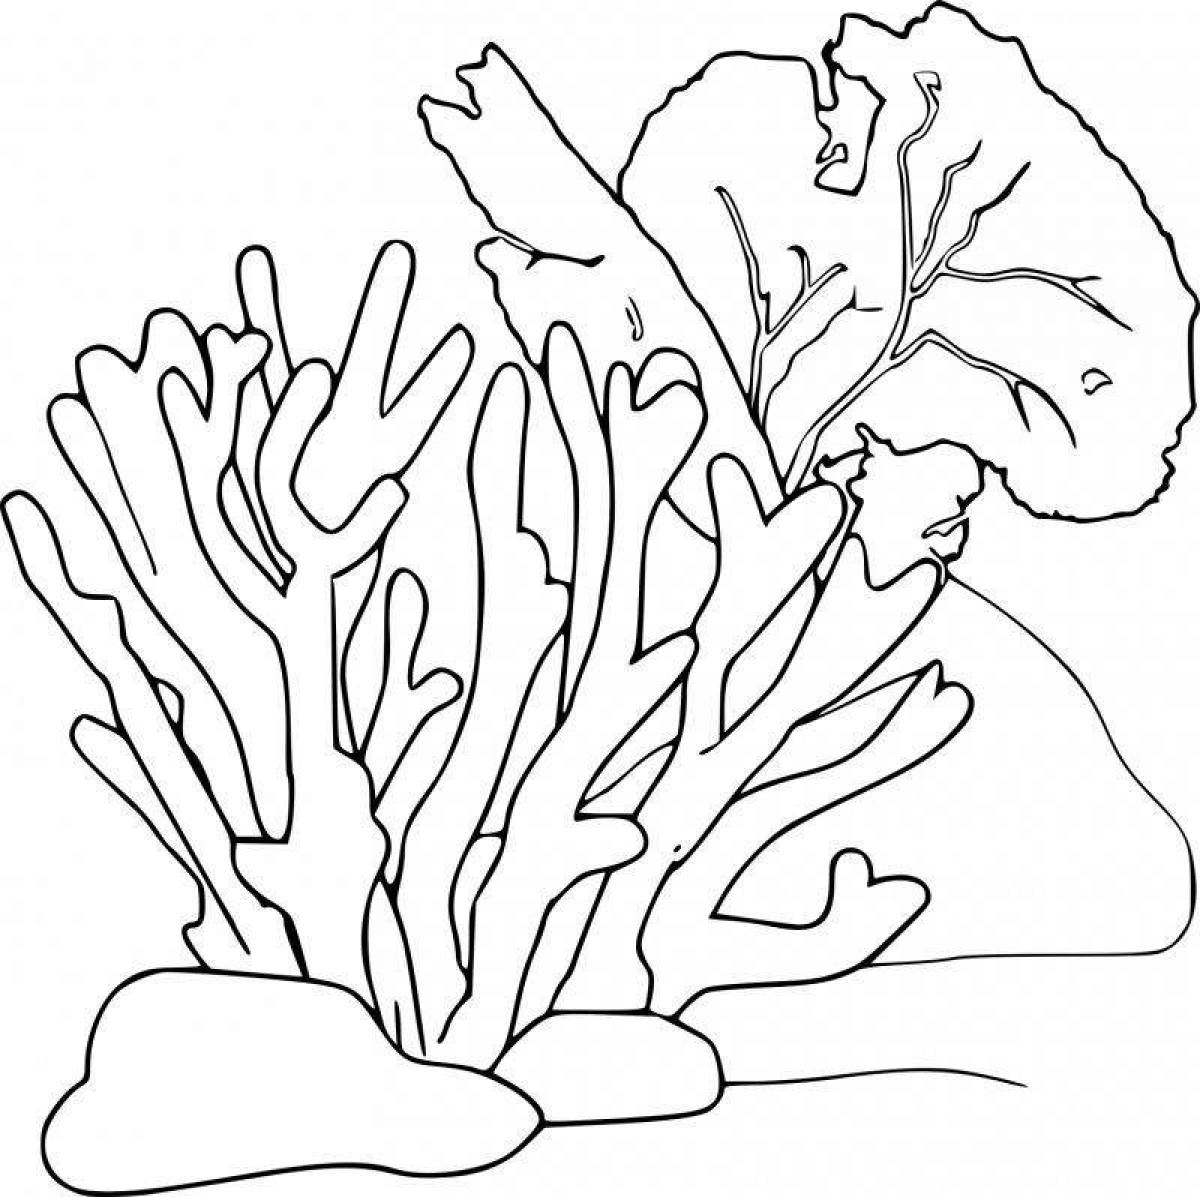 Coloring colorful corals